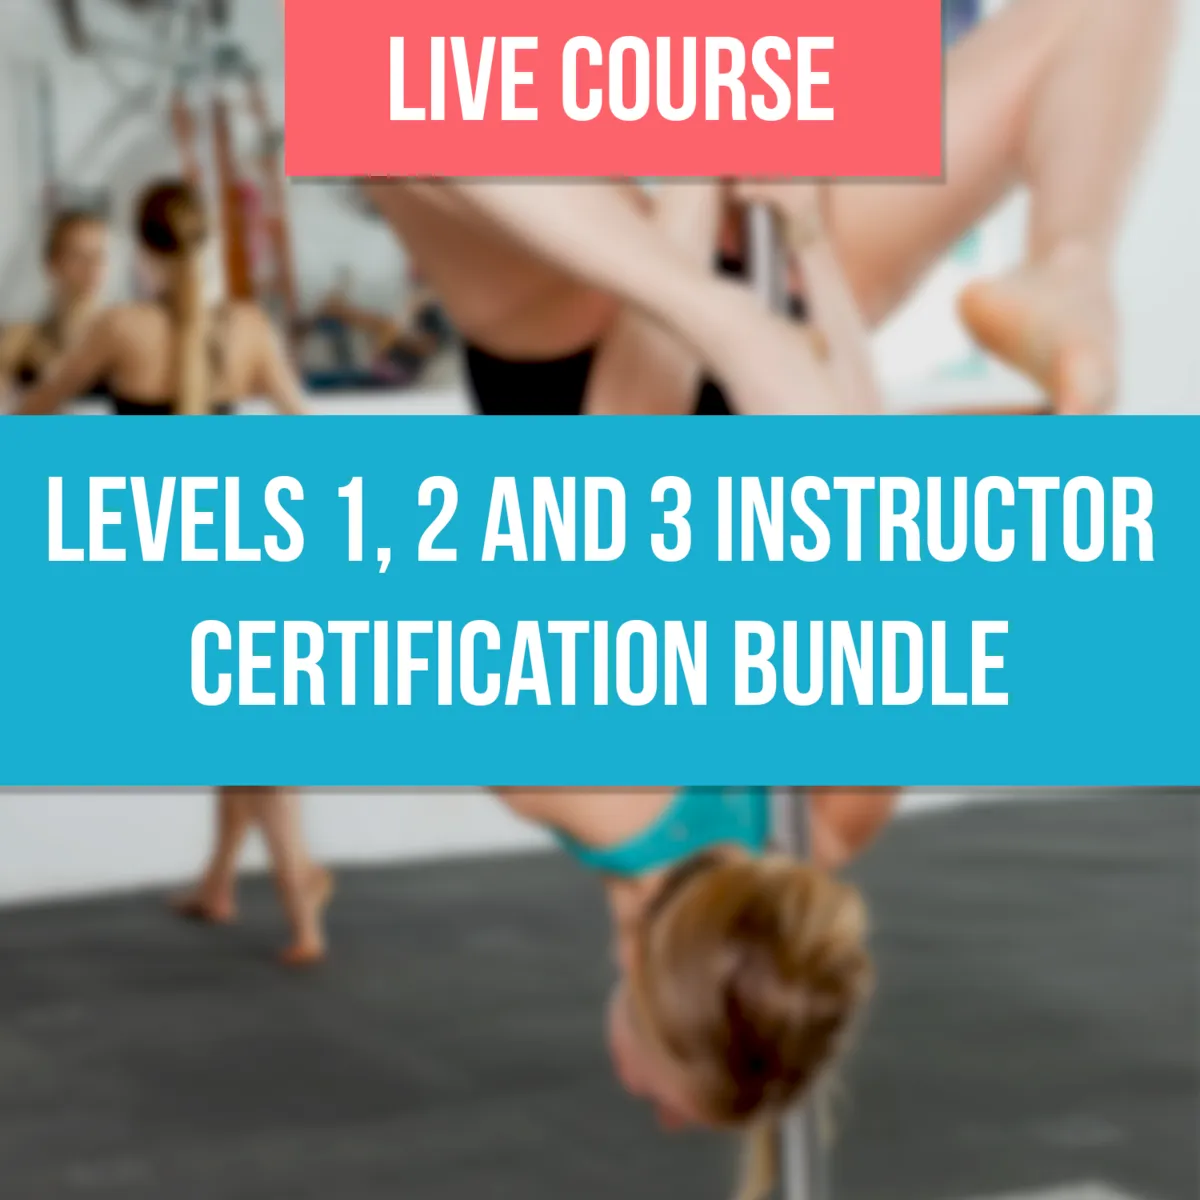 Level 1, 2 and 3 Bundle - Las Vegas, October 14, 15, and 16, 2022: DEPOSIT ONLY